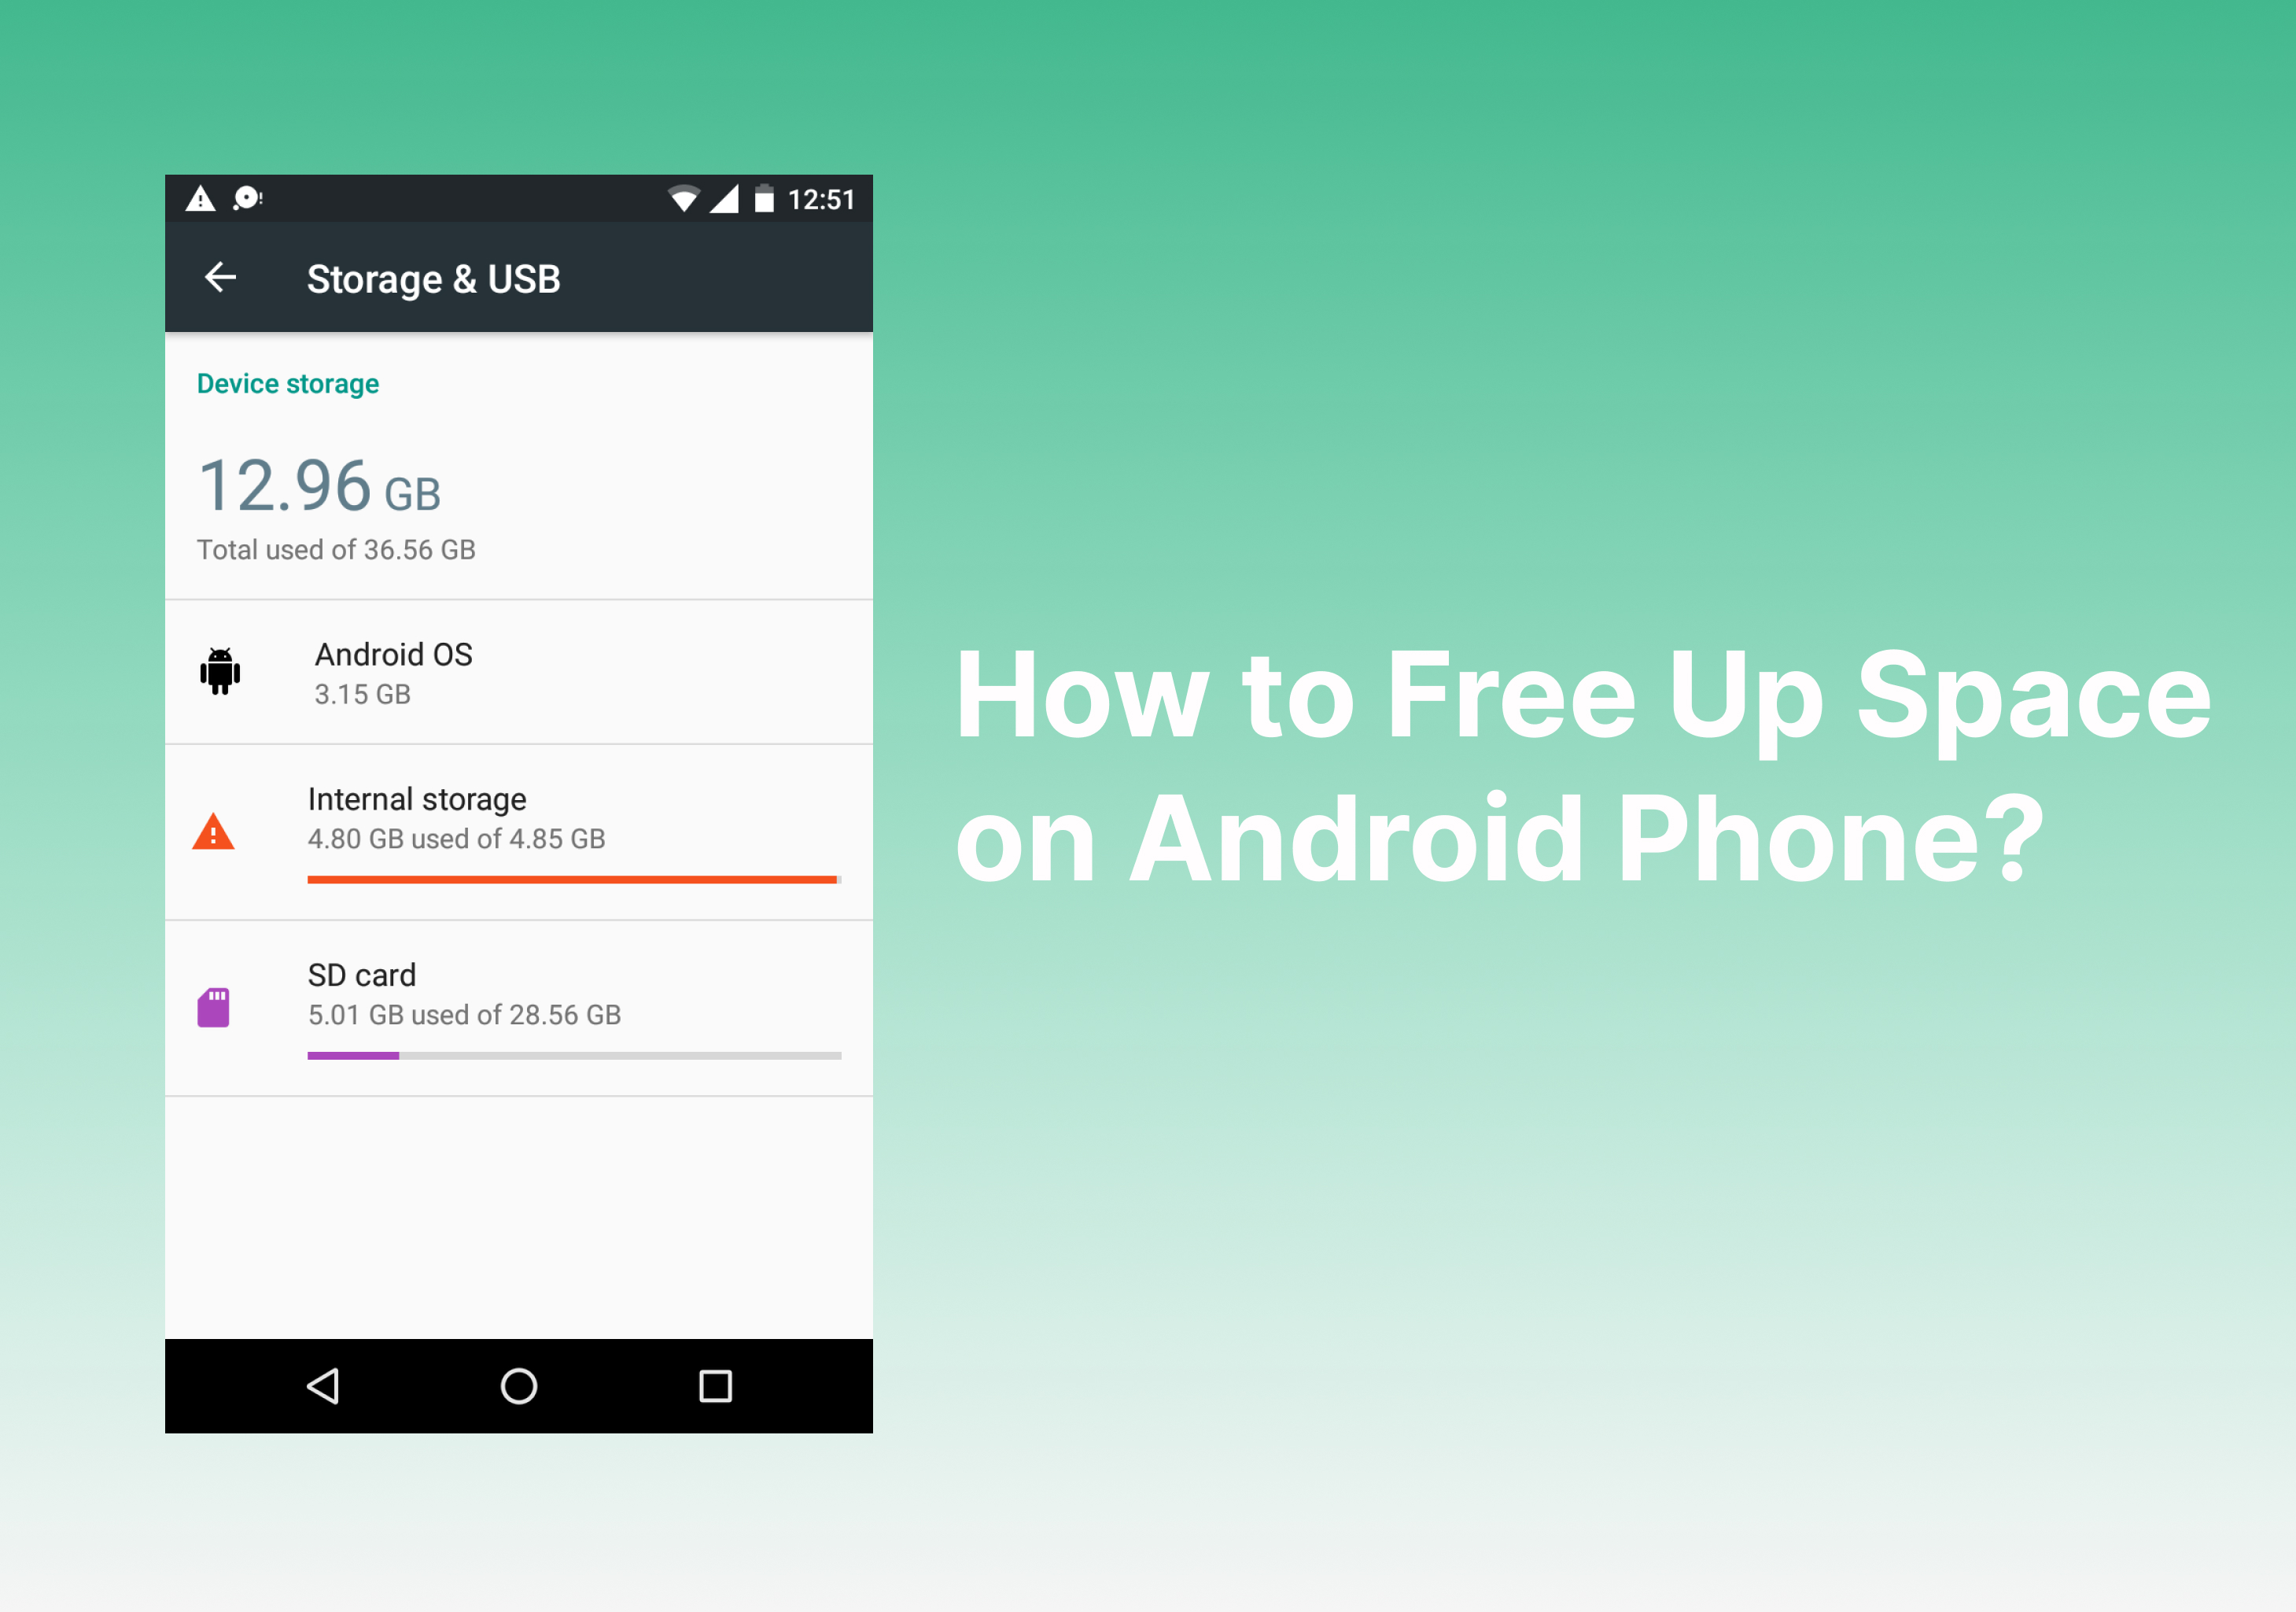 Discover How to Free Up Space on Android